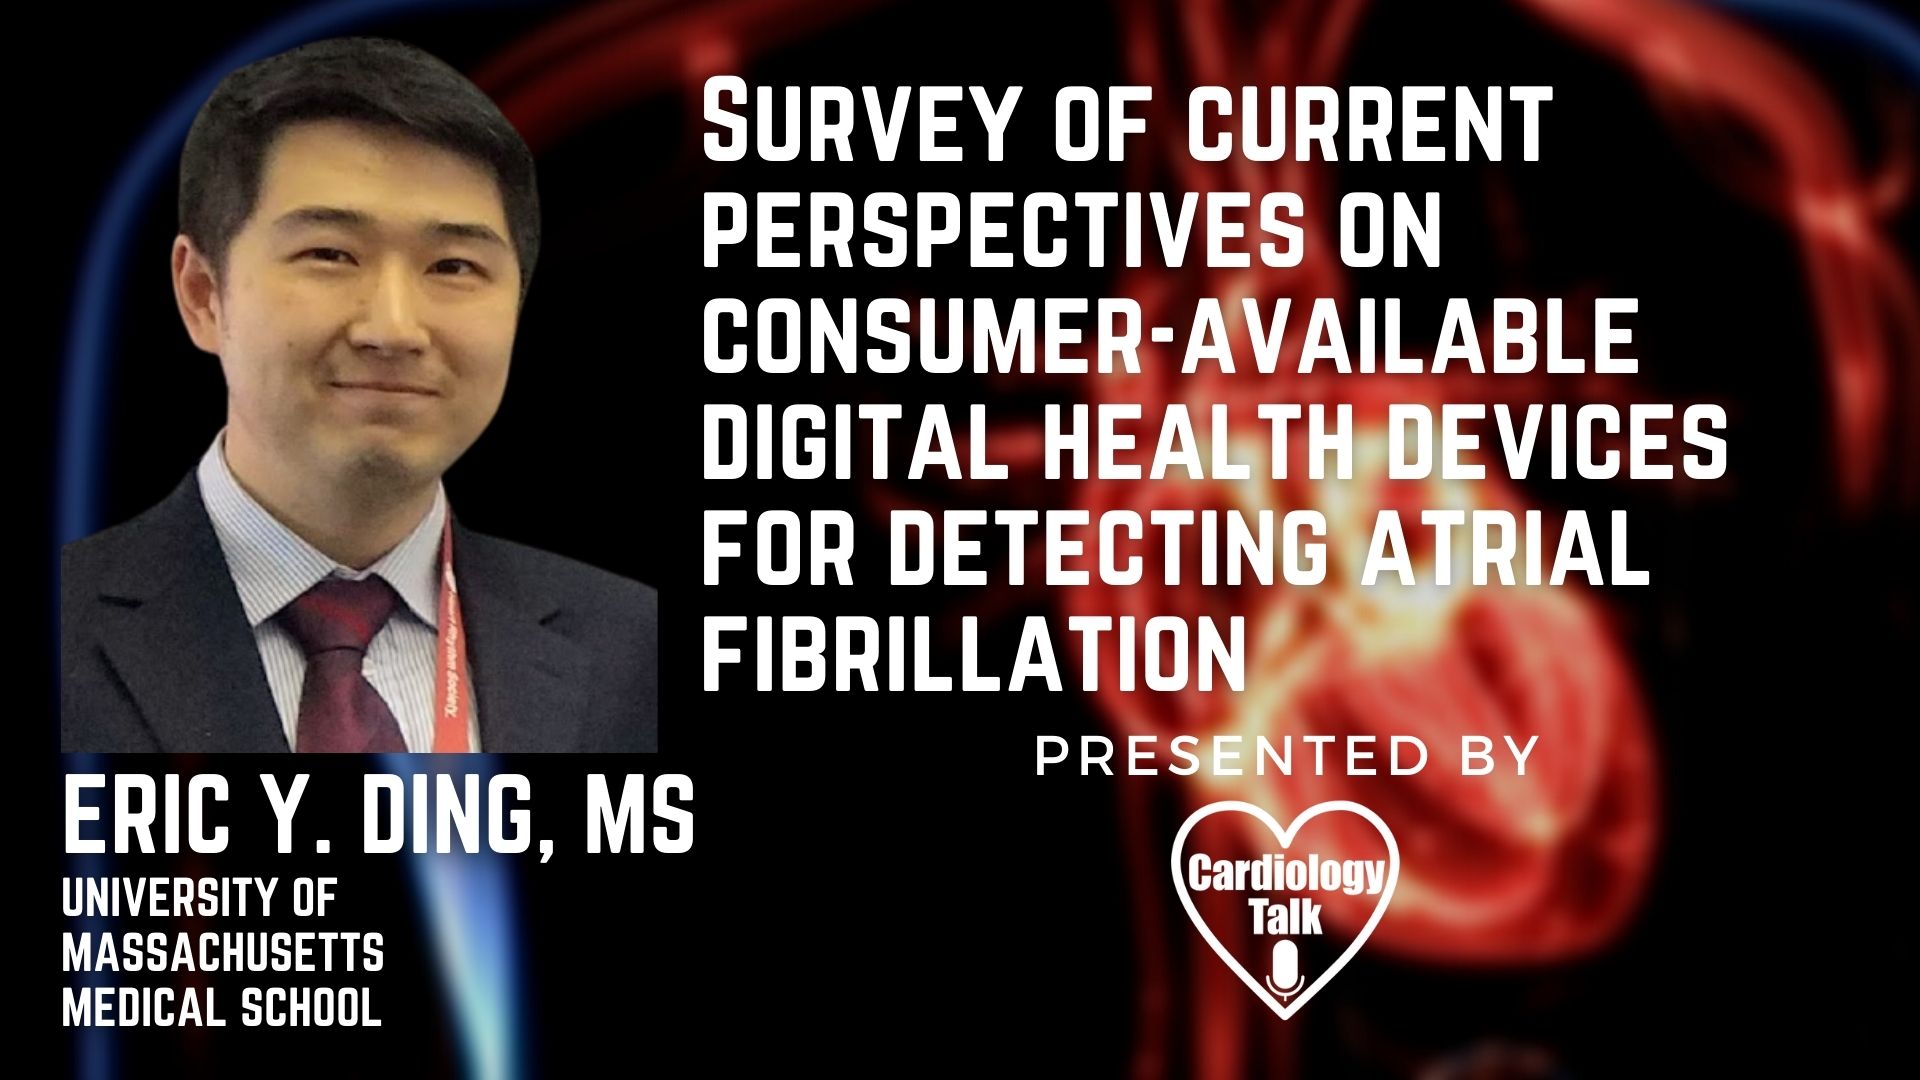 Eric Y. Ding, Ms @becomingdrding @UMassMedical #AtrialFibrillation #Cardiology #Heart #Research Survey Of Current Perspectives On Consumer-available Digital Health Devices For Detecting A...